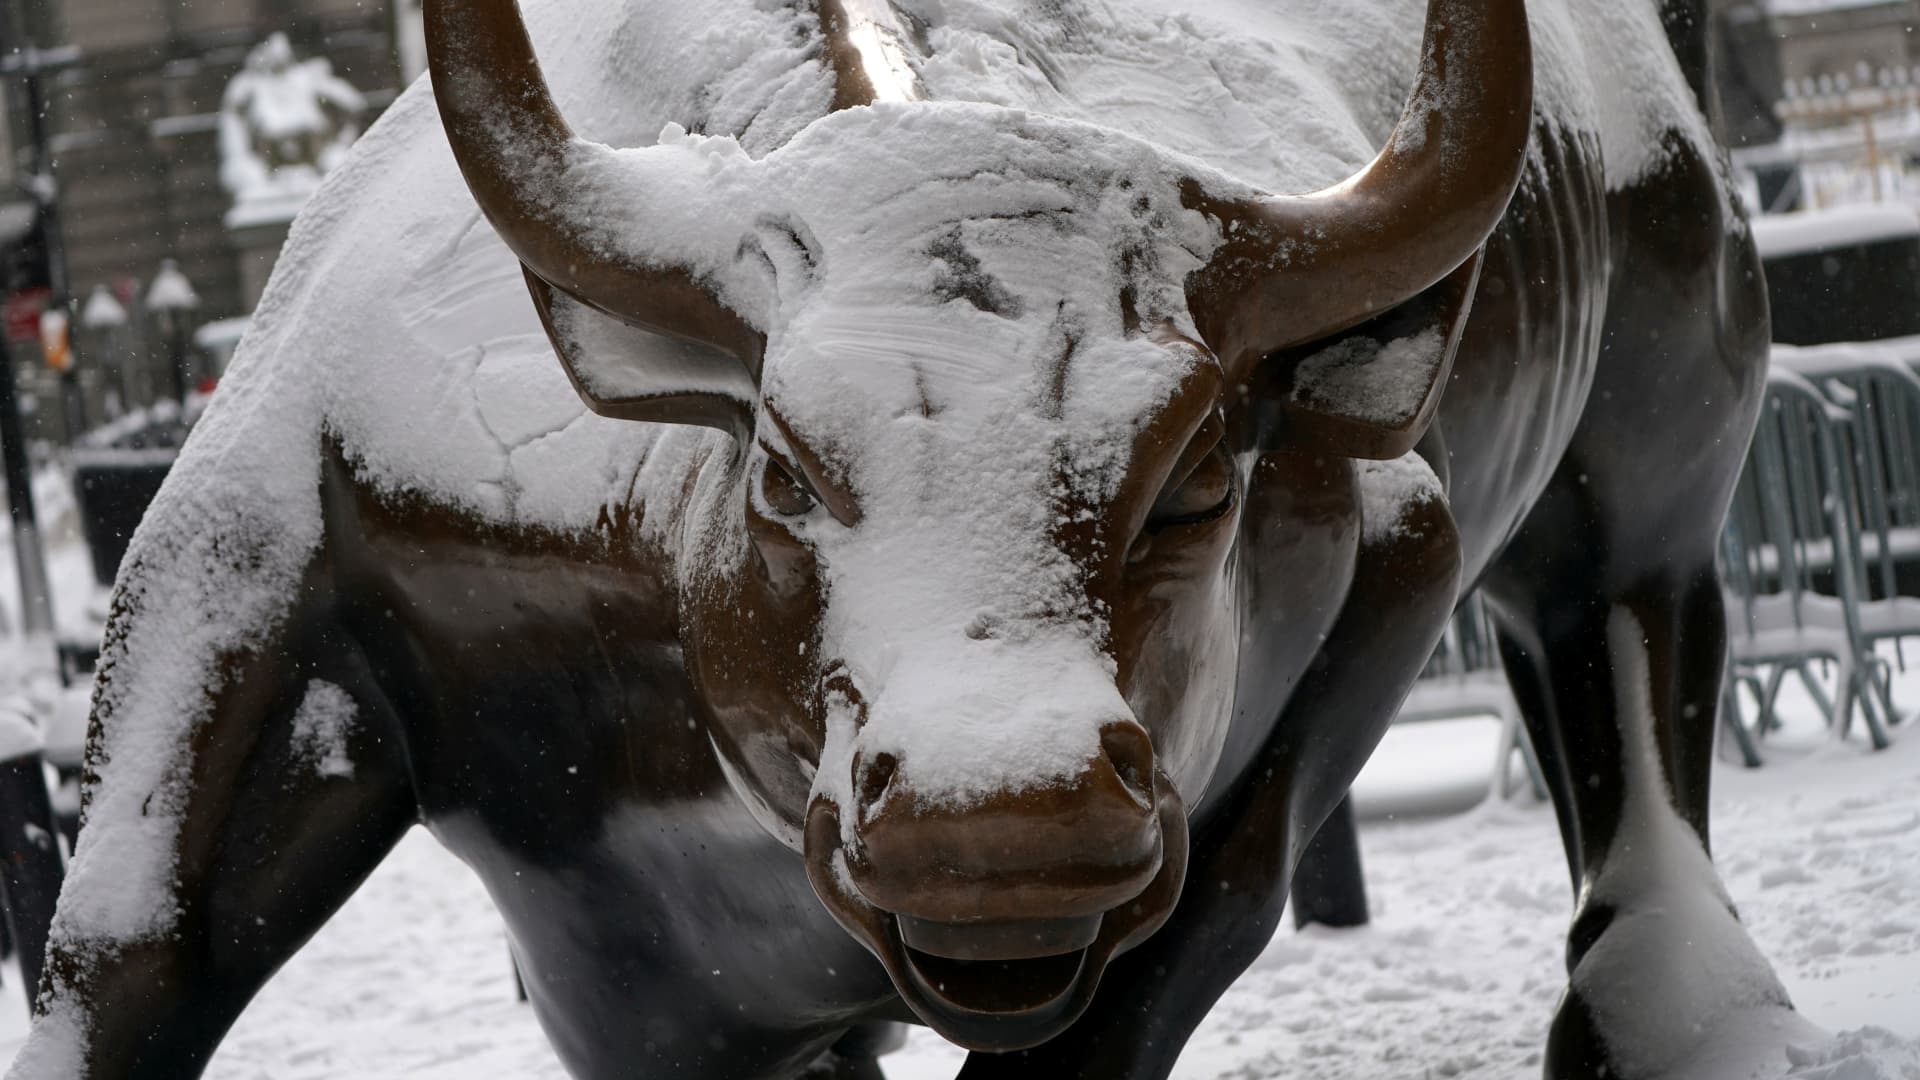 Snow covers the Charging Bull sculpture in the Financial District of Manhattan, New York City, New York, U.S., December 17, 2020.